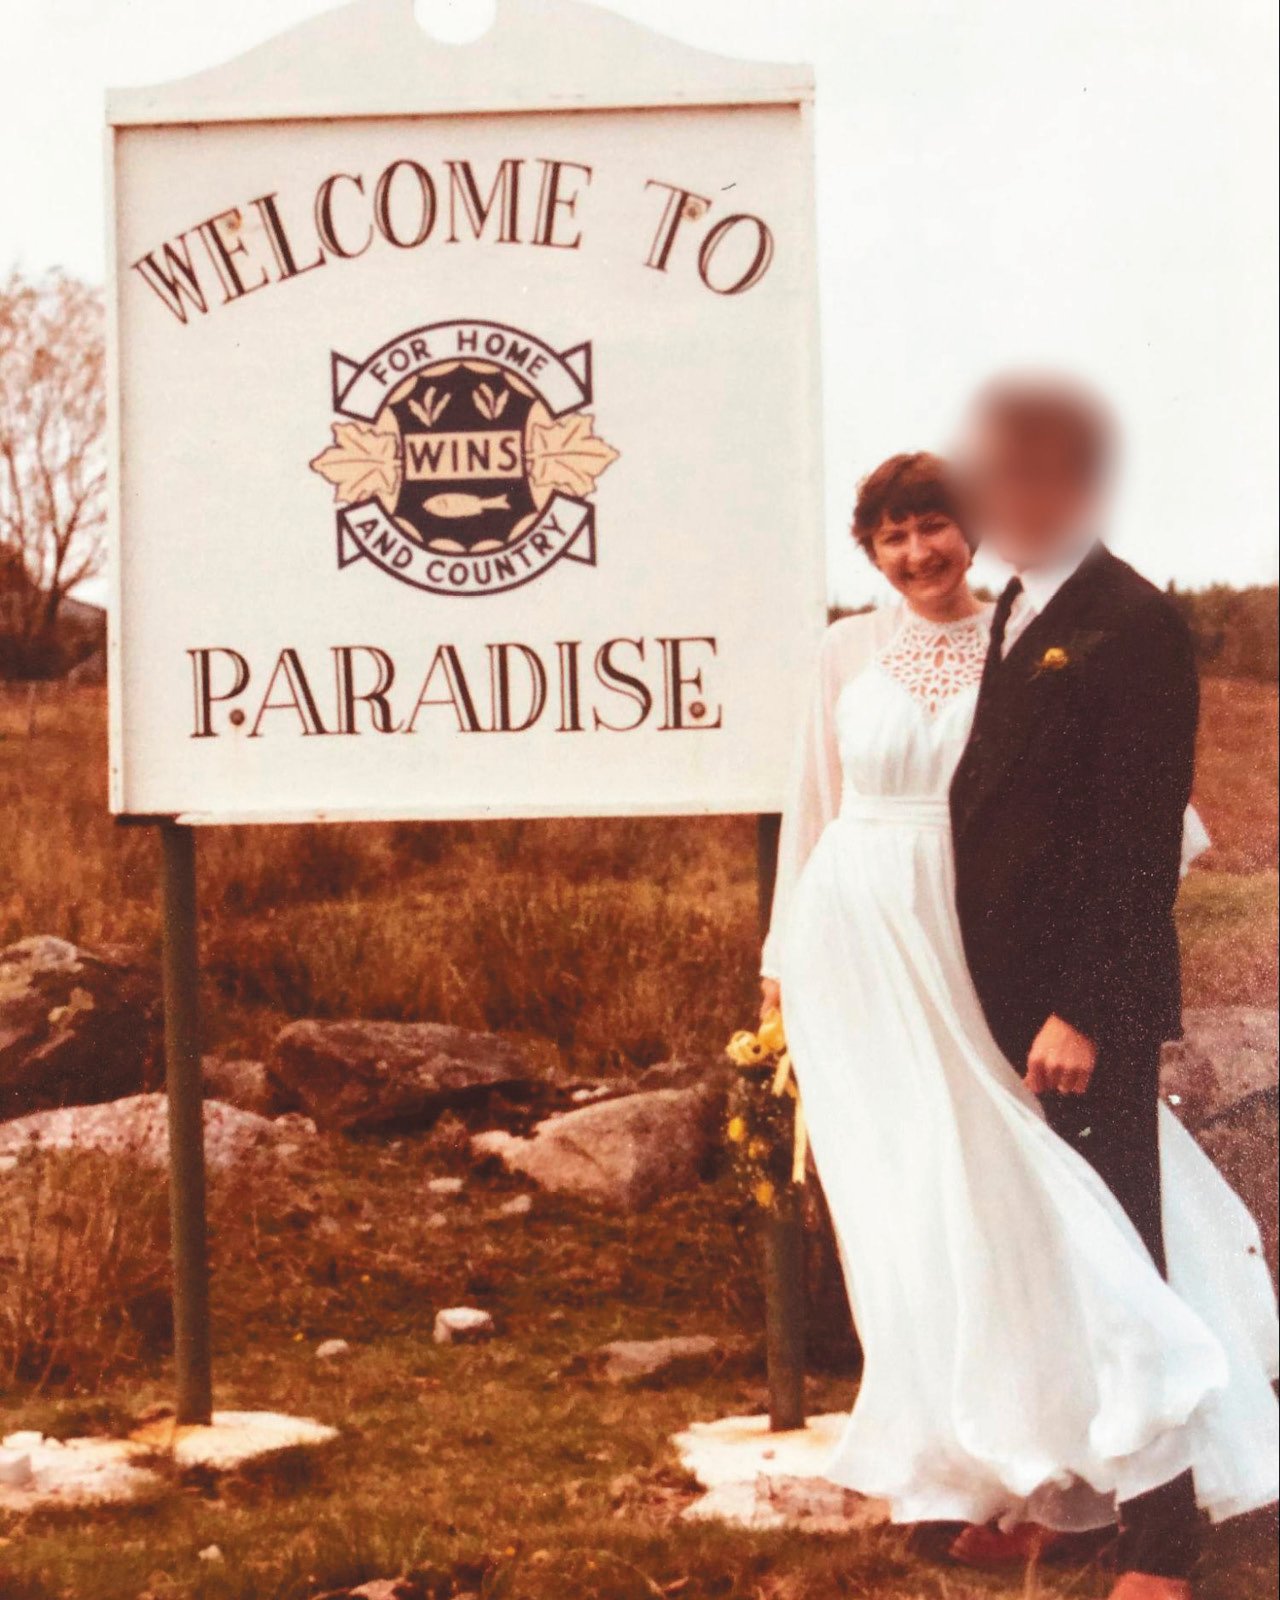 Anna Maria Tremonti poses with her ex-husband, Pat, on their wedding day in front of a "Welcome to Paradise" sign.